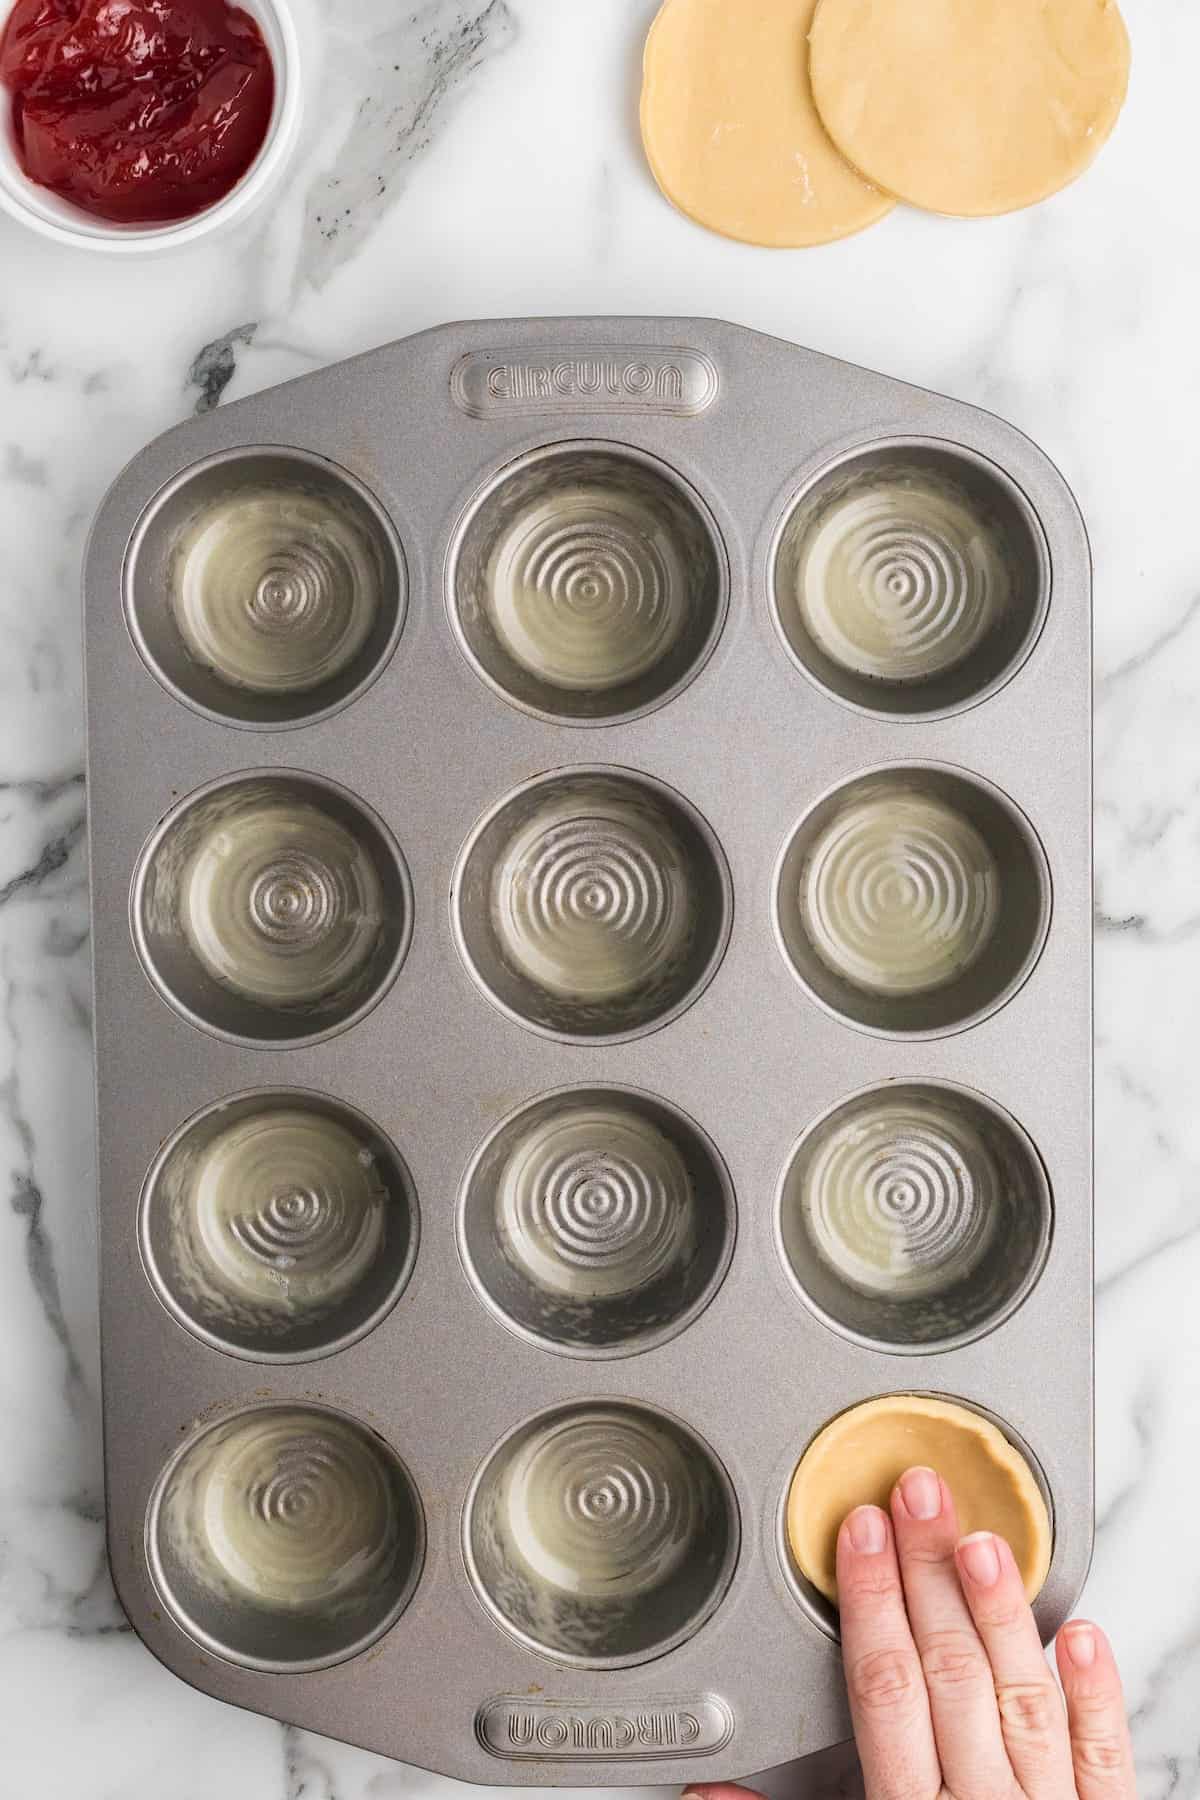 filling the muffin tins with the pastry dough.